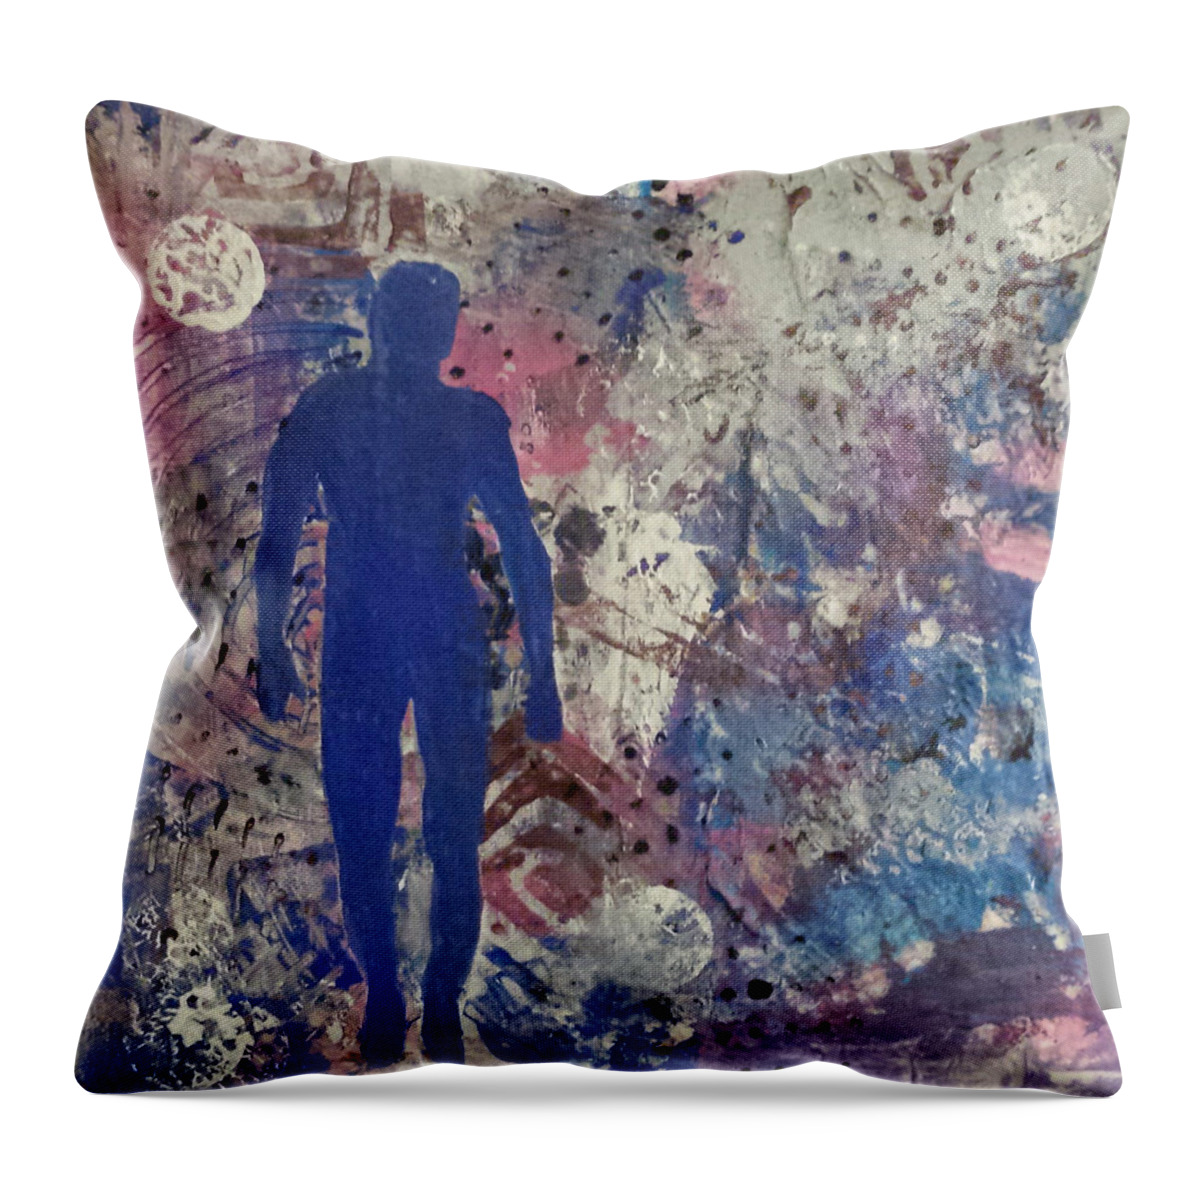 Abstract Throw Pillow featuring the painting Silouette 2 by Elise Boam